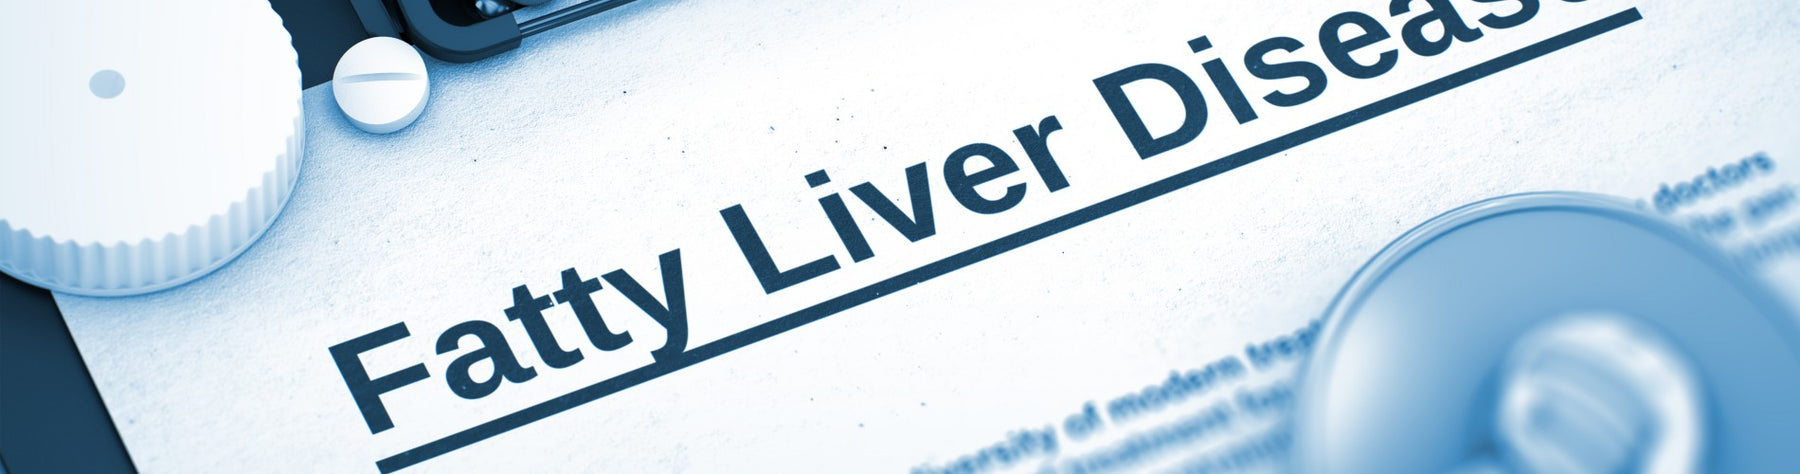 Fatty Liver Diet - Combating Non-Alcohol Related Fatty Liver Disease